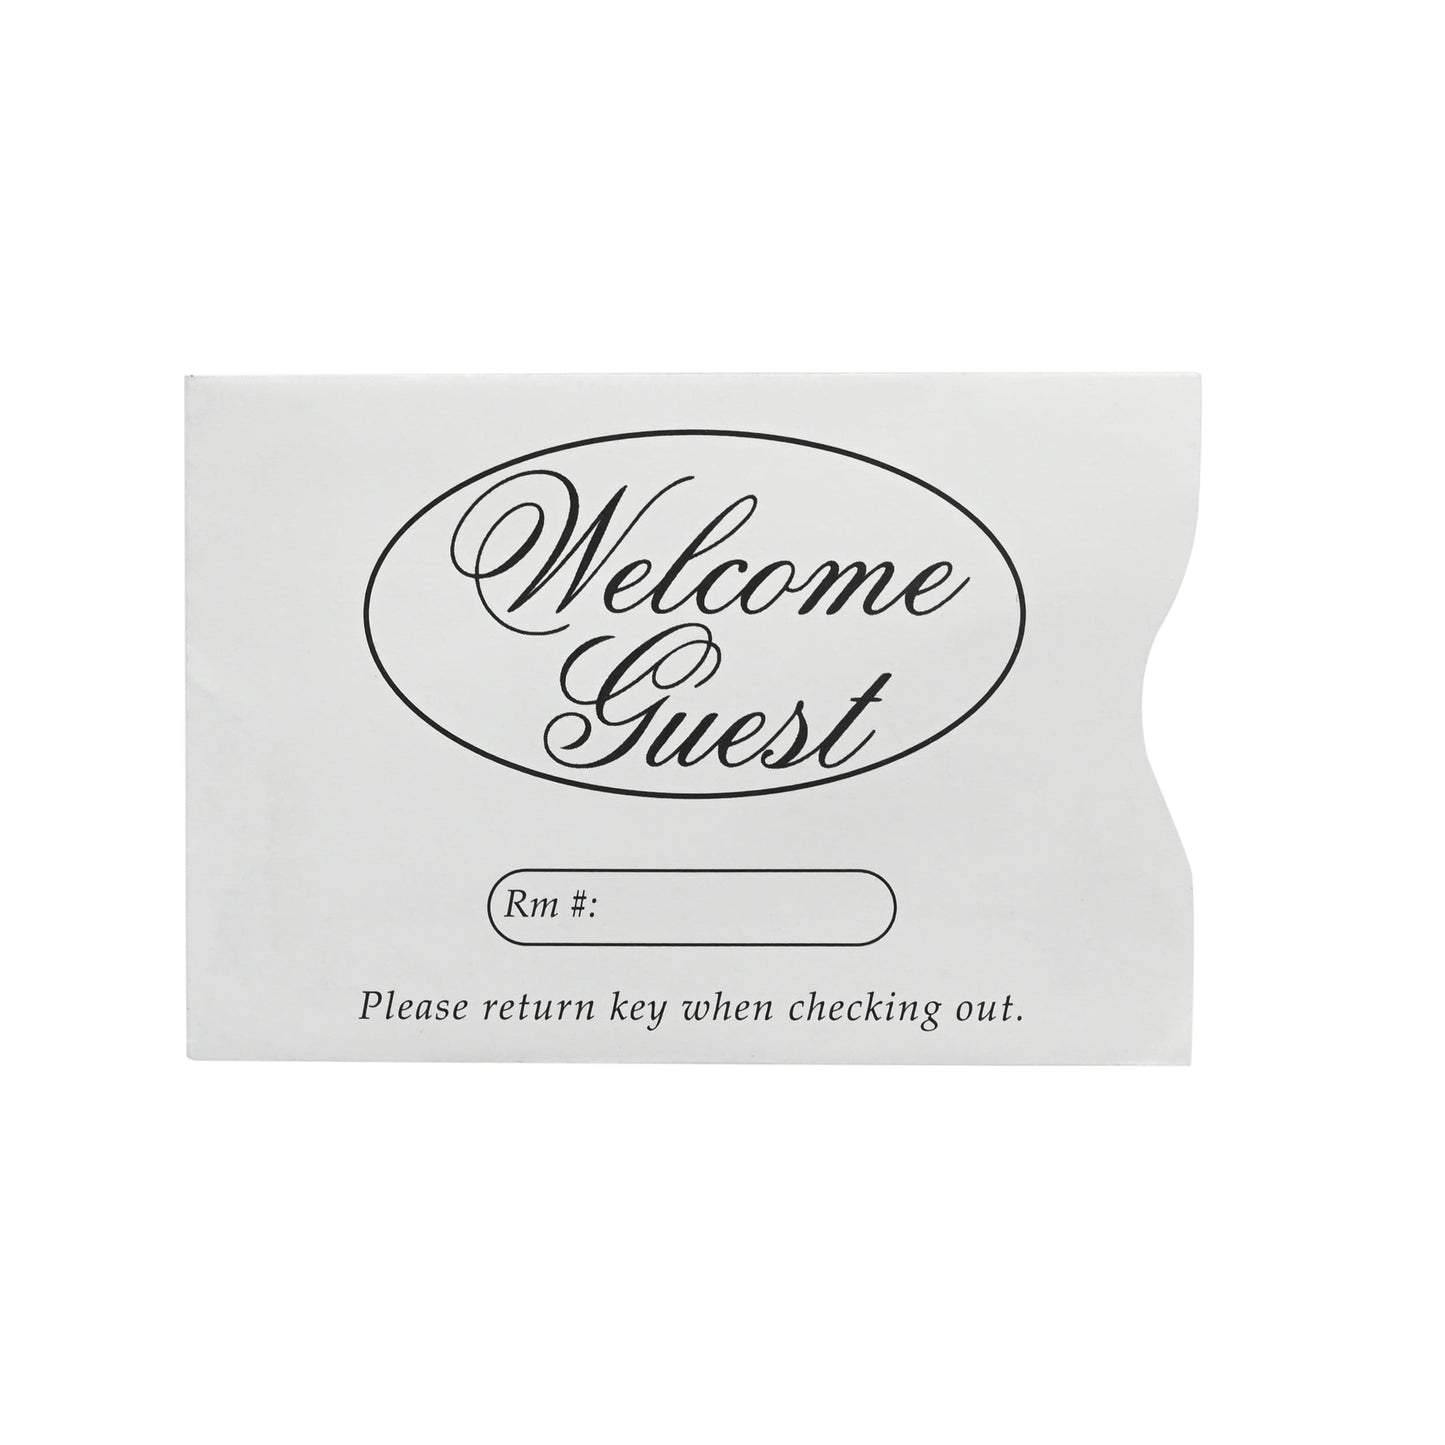 Generic Welcome Key Sleeves (Sold in boxes of 1000)